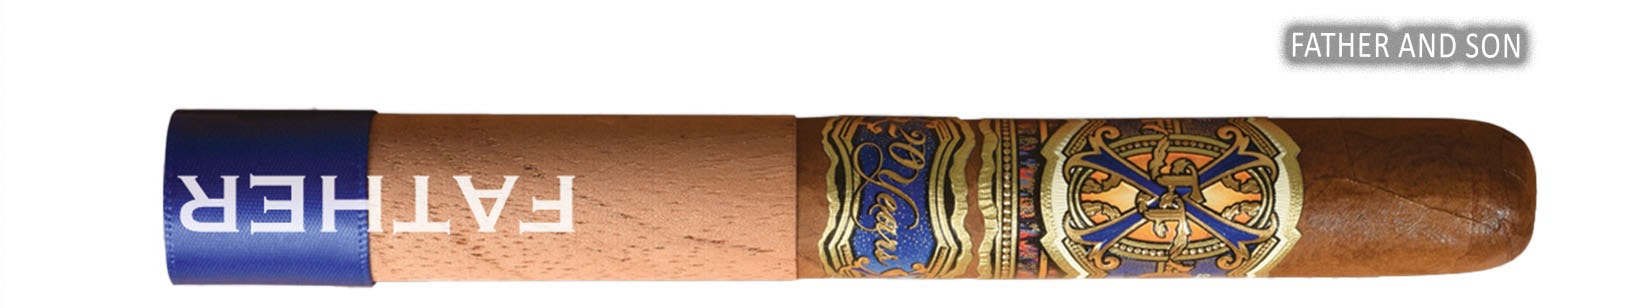 Opus X 20th Anniversary Father and Son